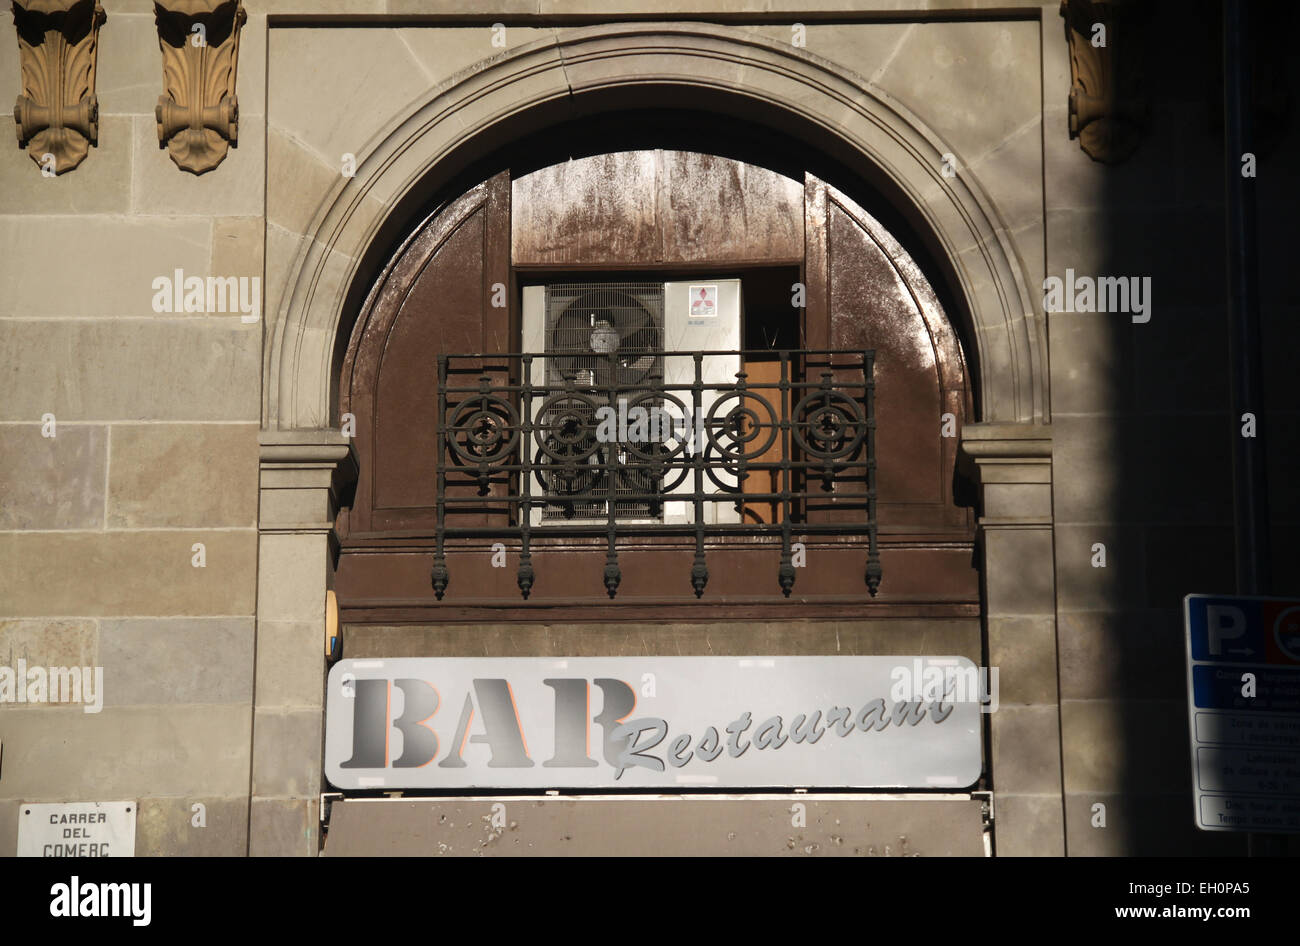 Air conditioning units in arched alcove above sign for Bar Restaurant in  Carrer del Comerç, Barcelona, Catalonia, Spain Stock Photo - Alamy